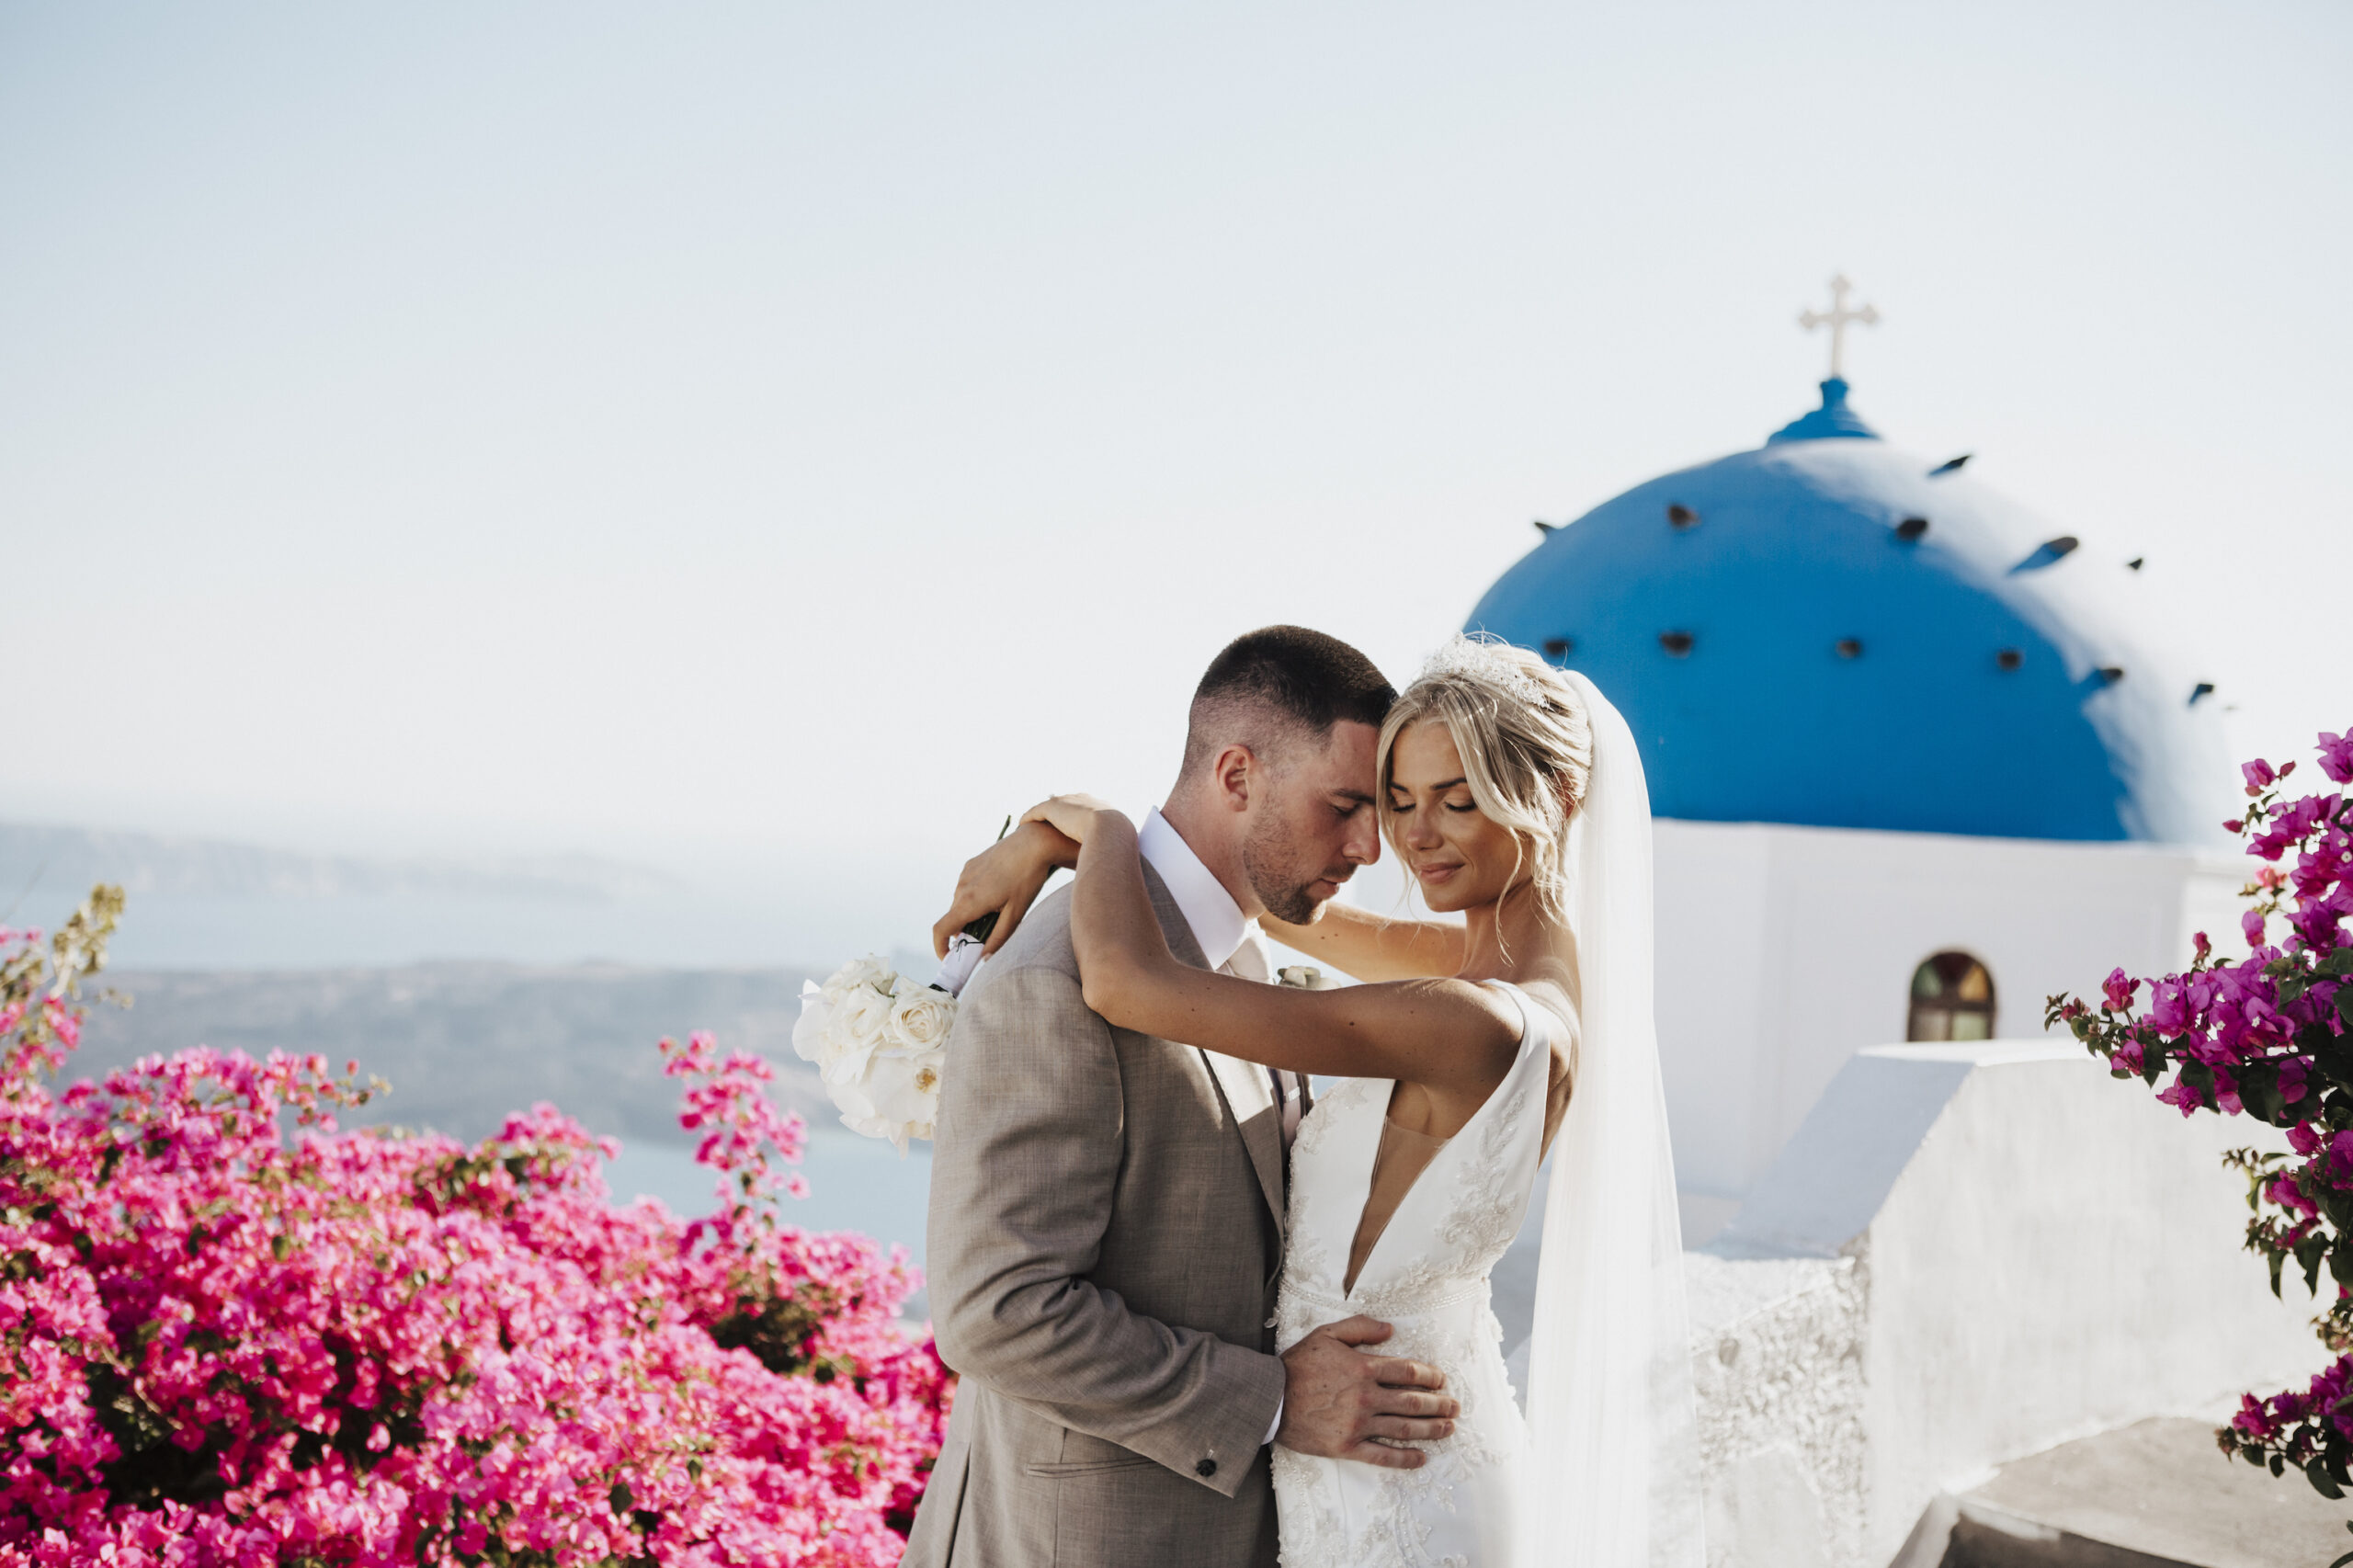 Bride and groom embracing in front of white and blue Santorini village at their destination wedding